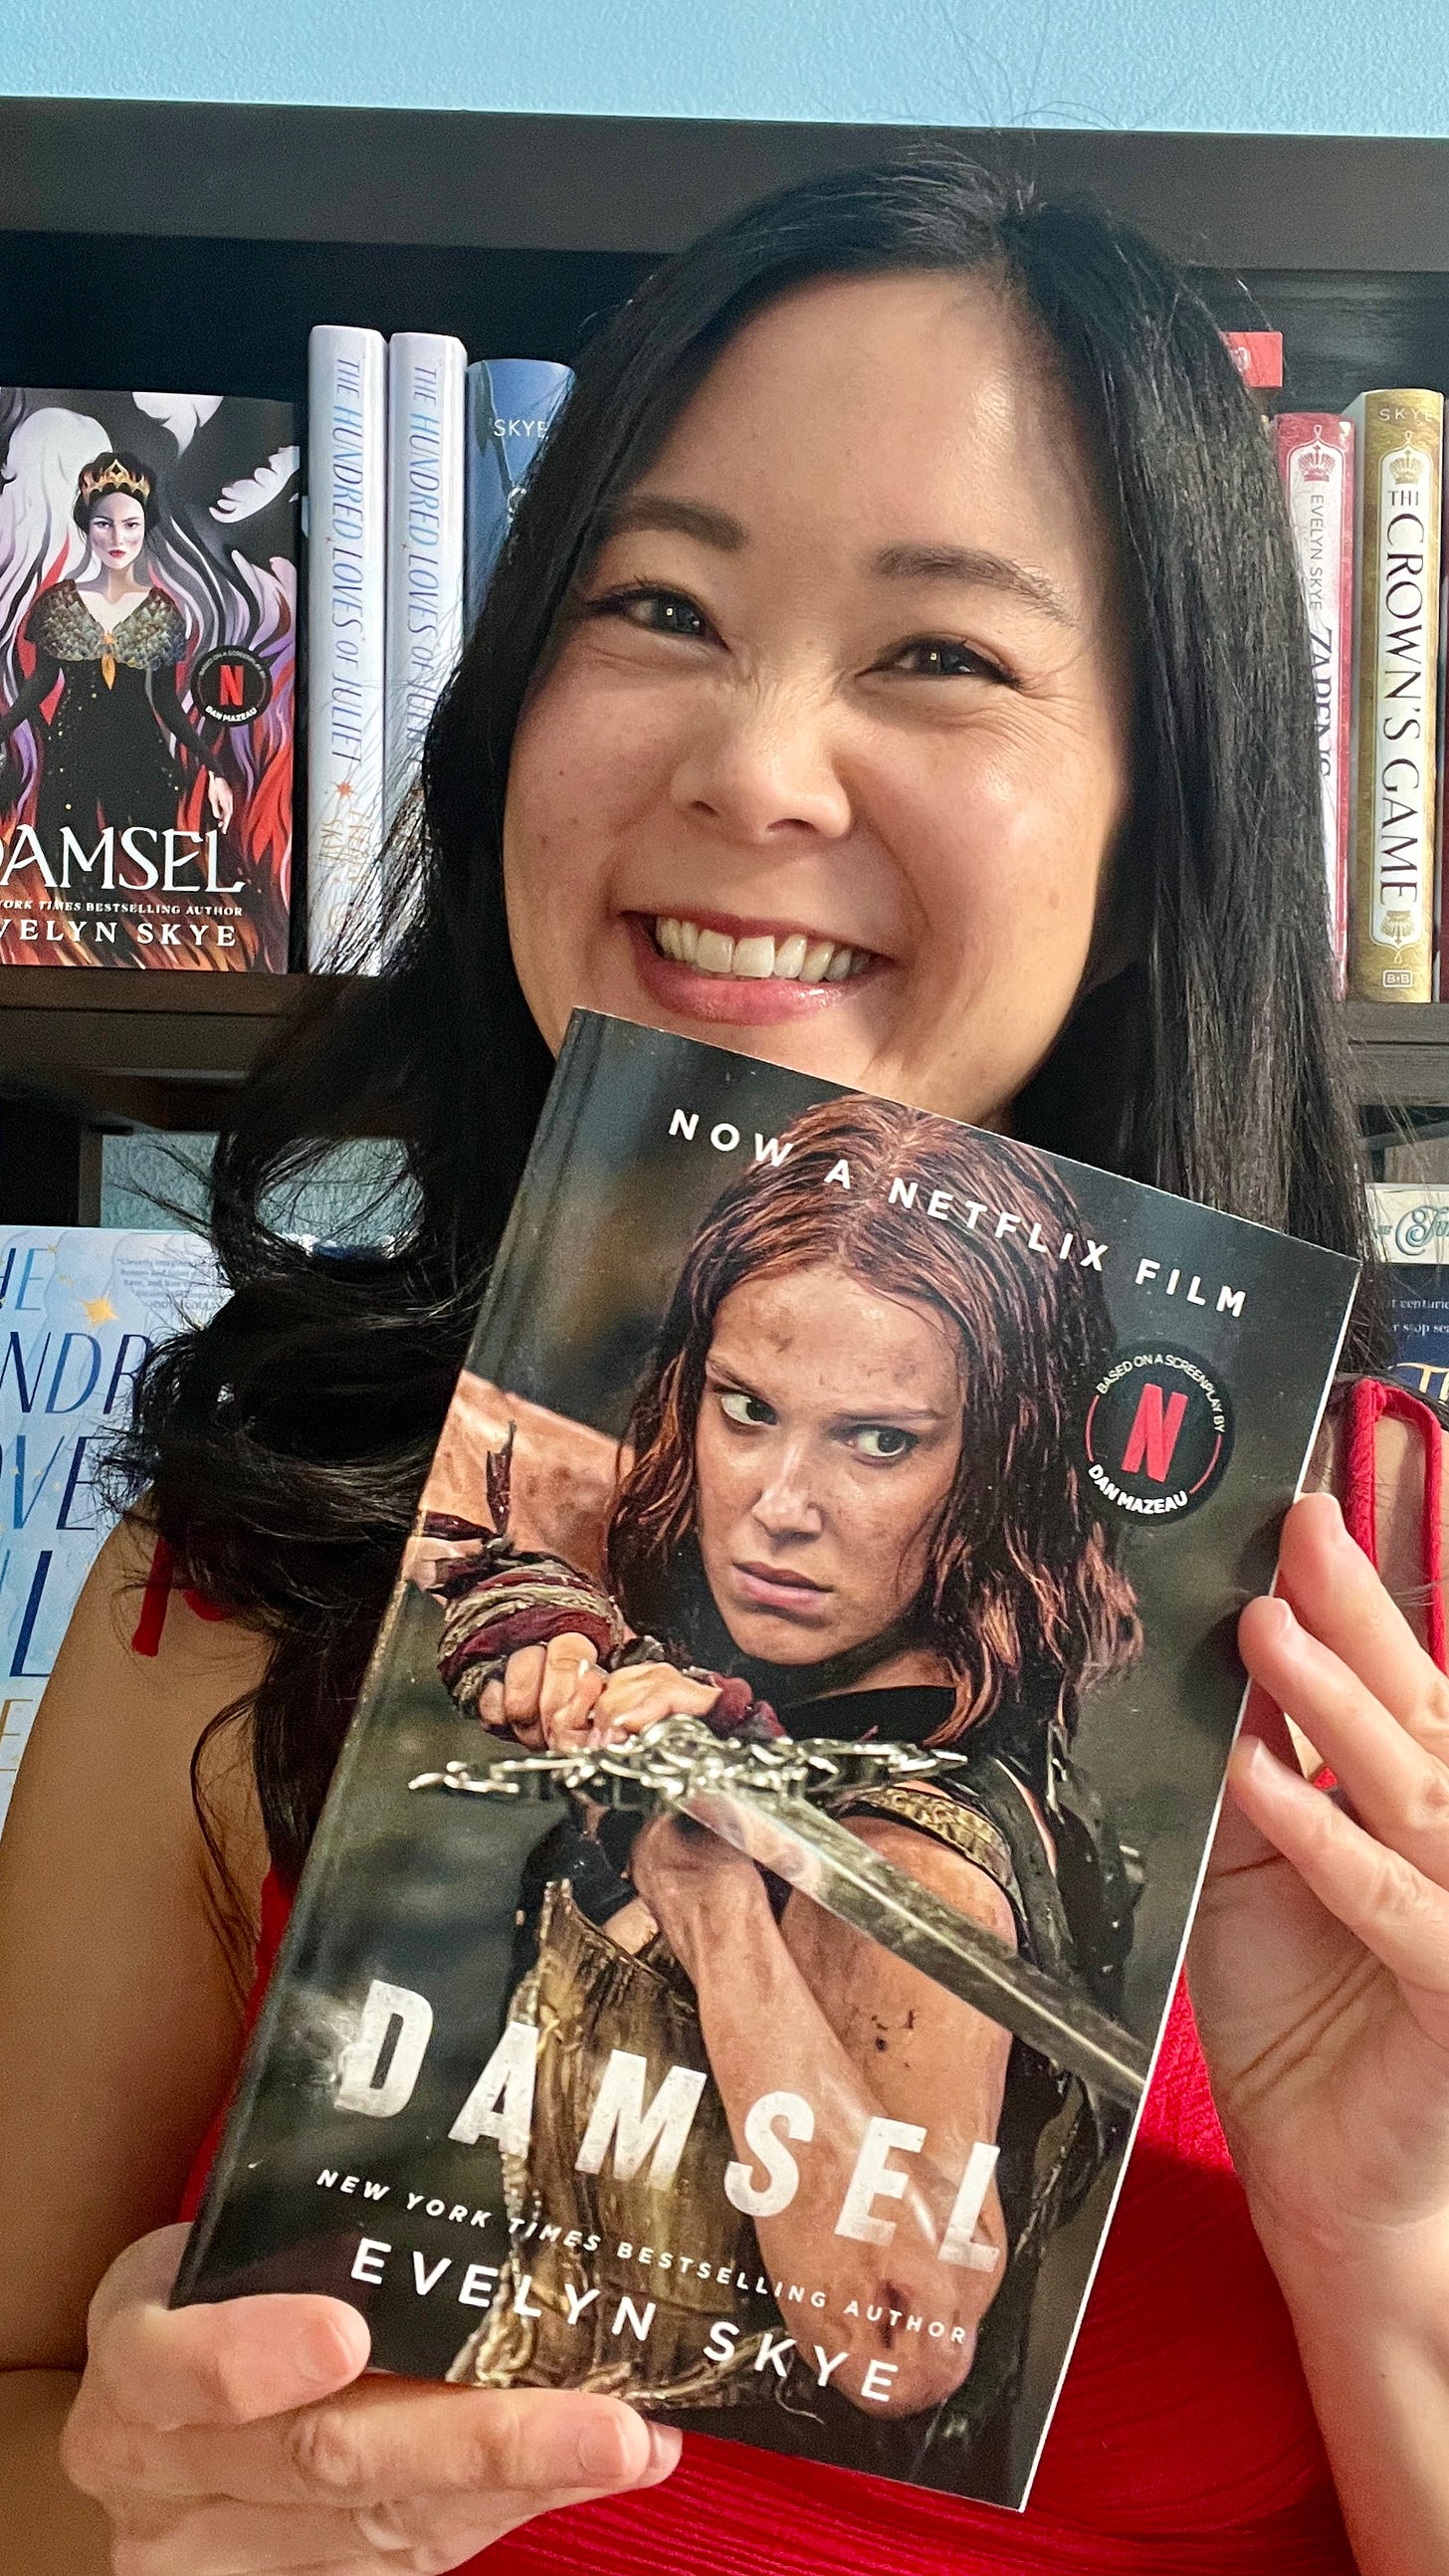 Evelyn Skye with a copy of Damsel.